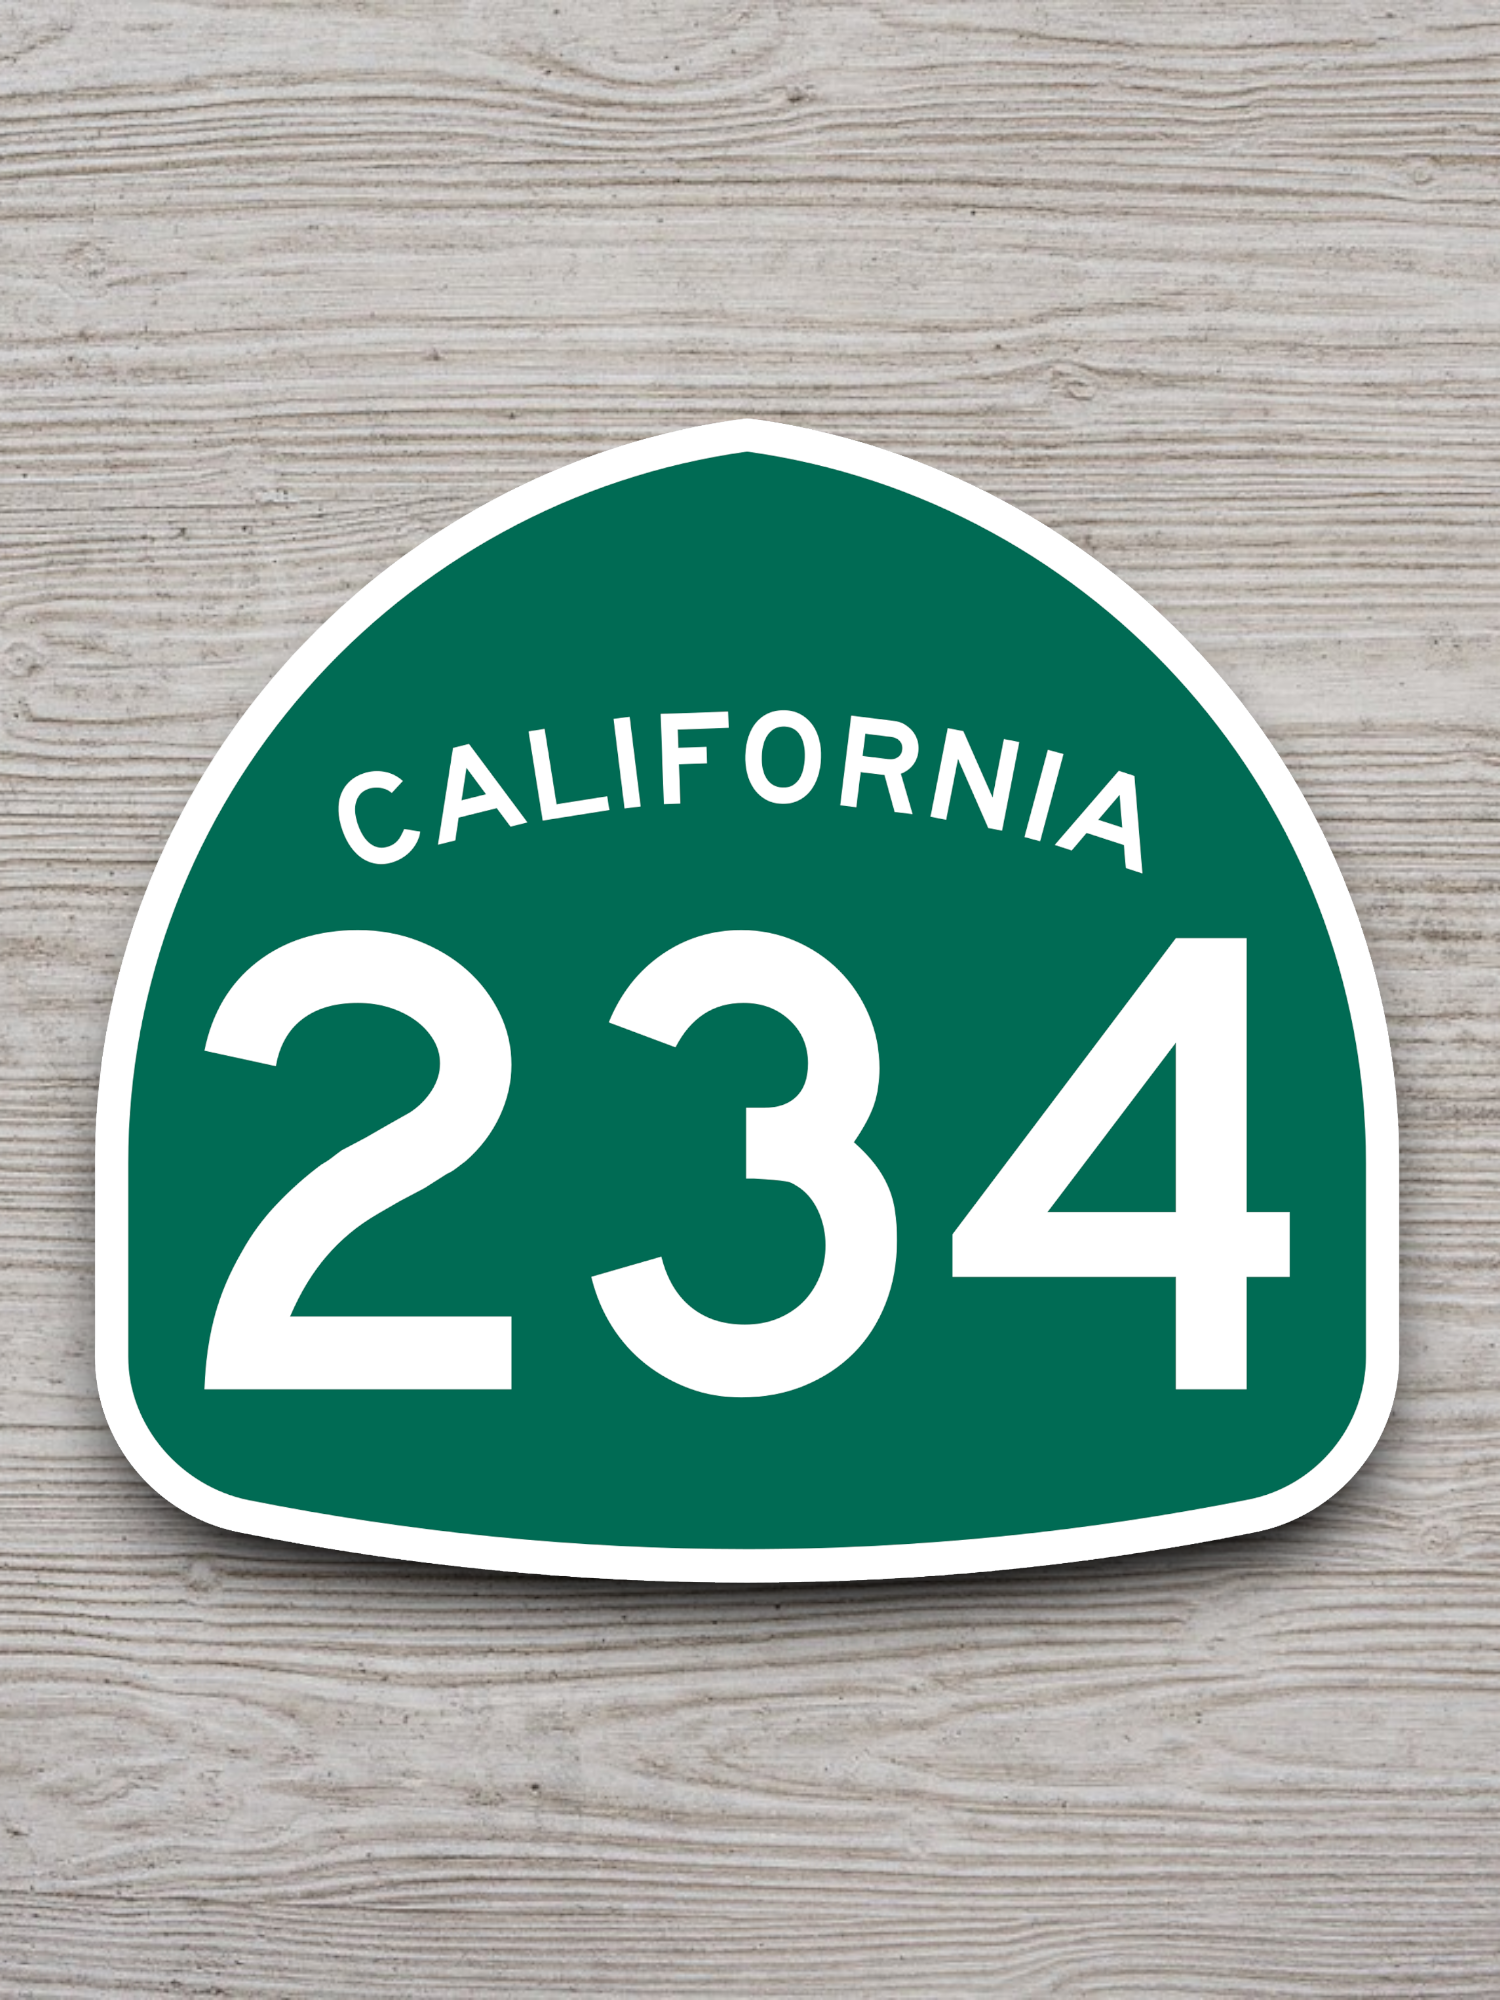 California State Route 234 Road Sign Sticker